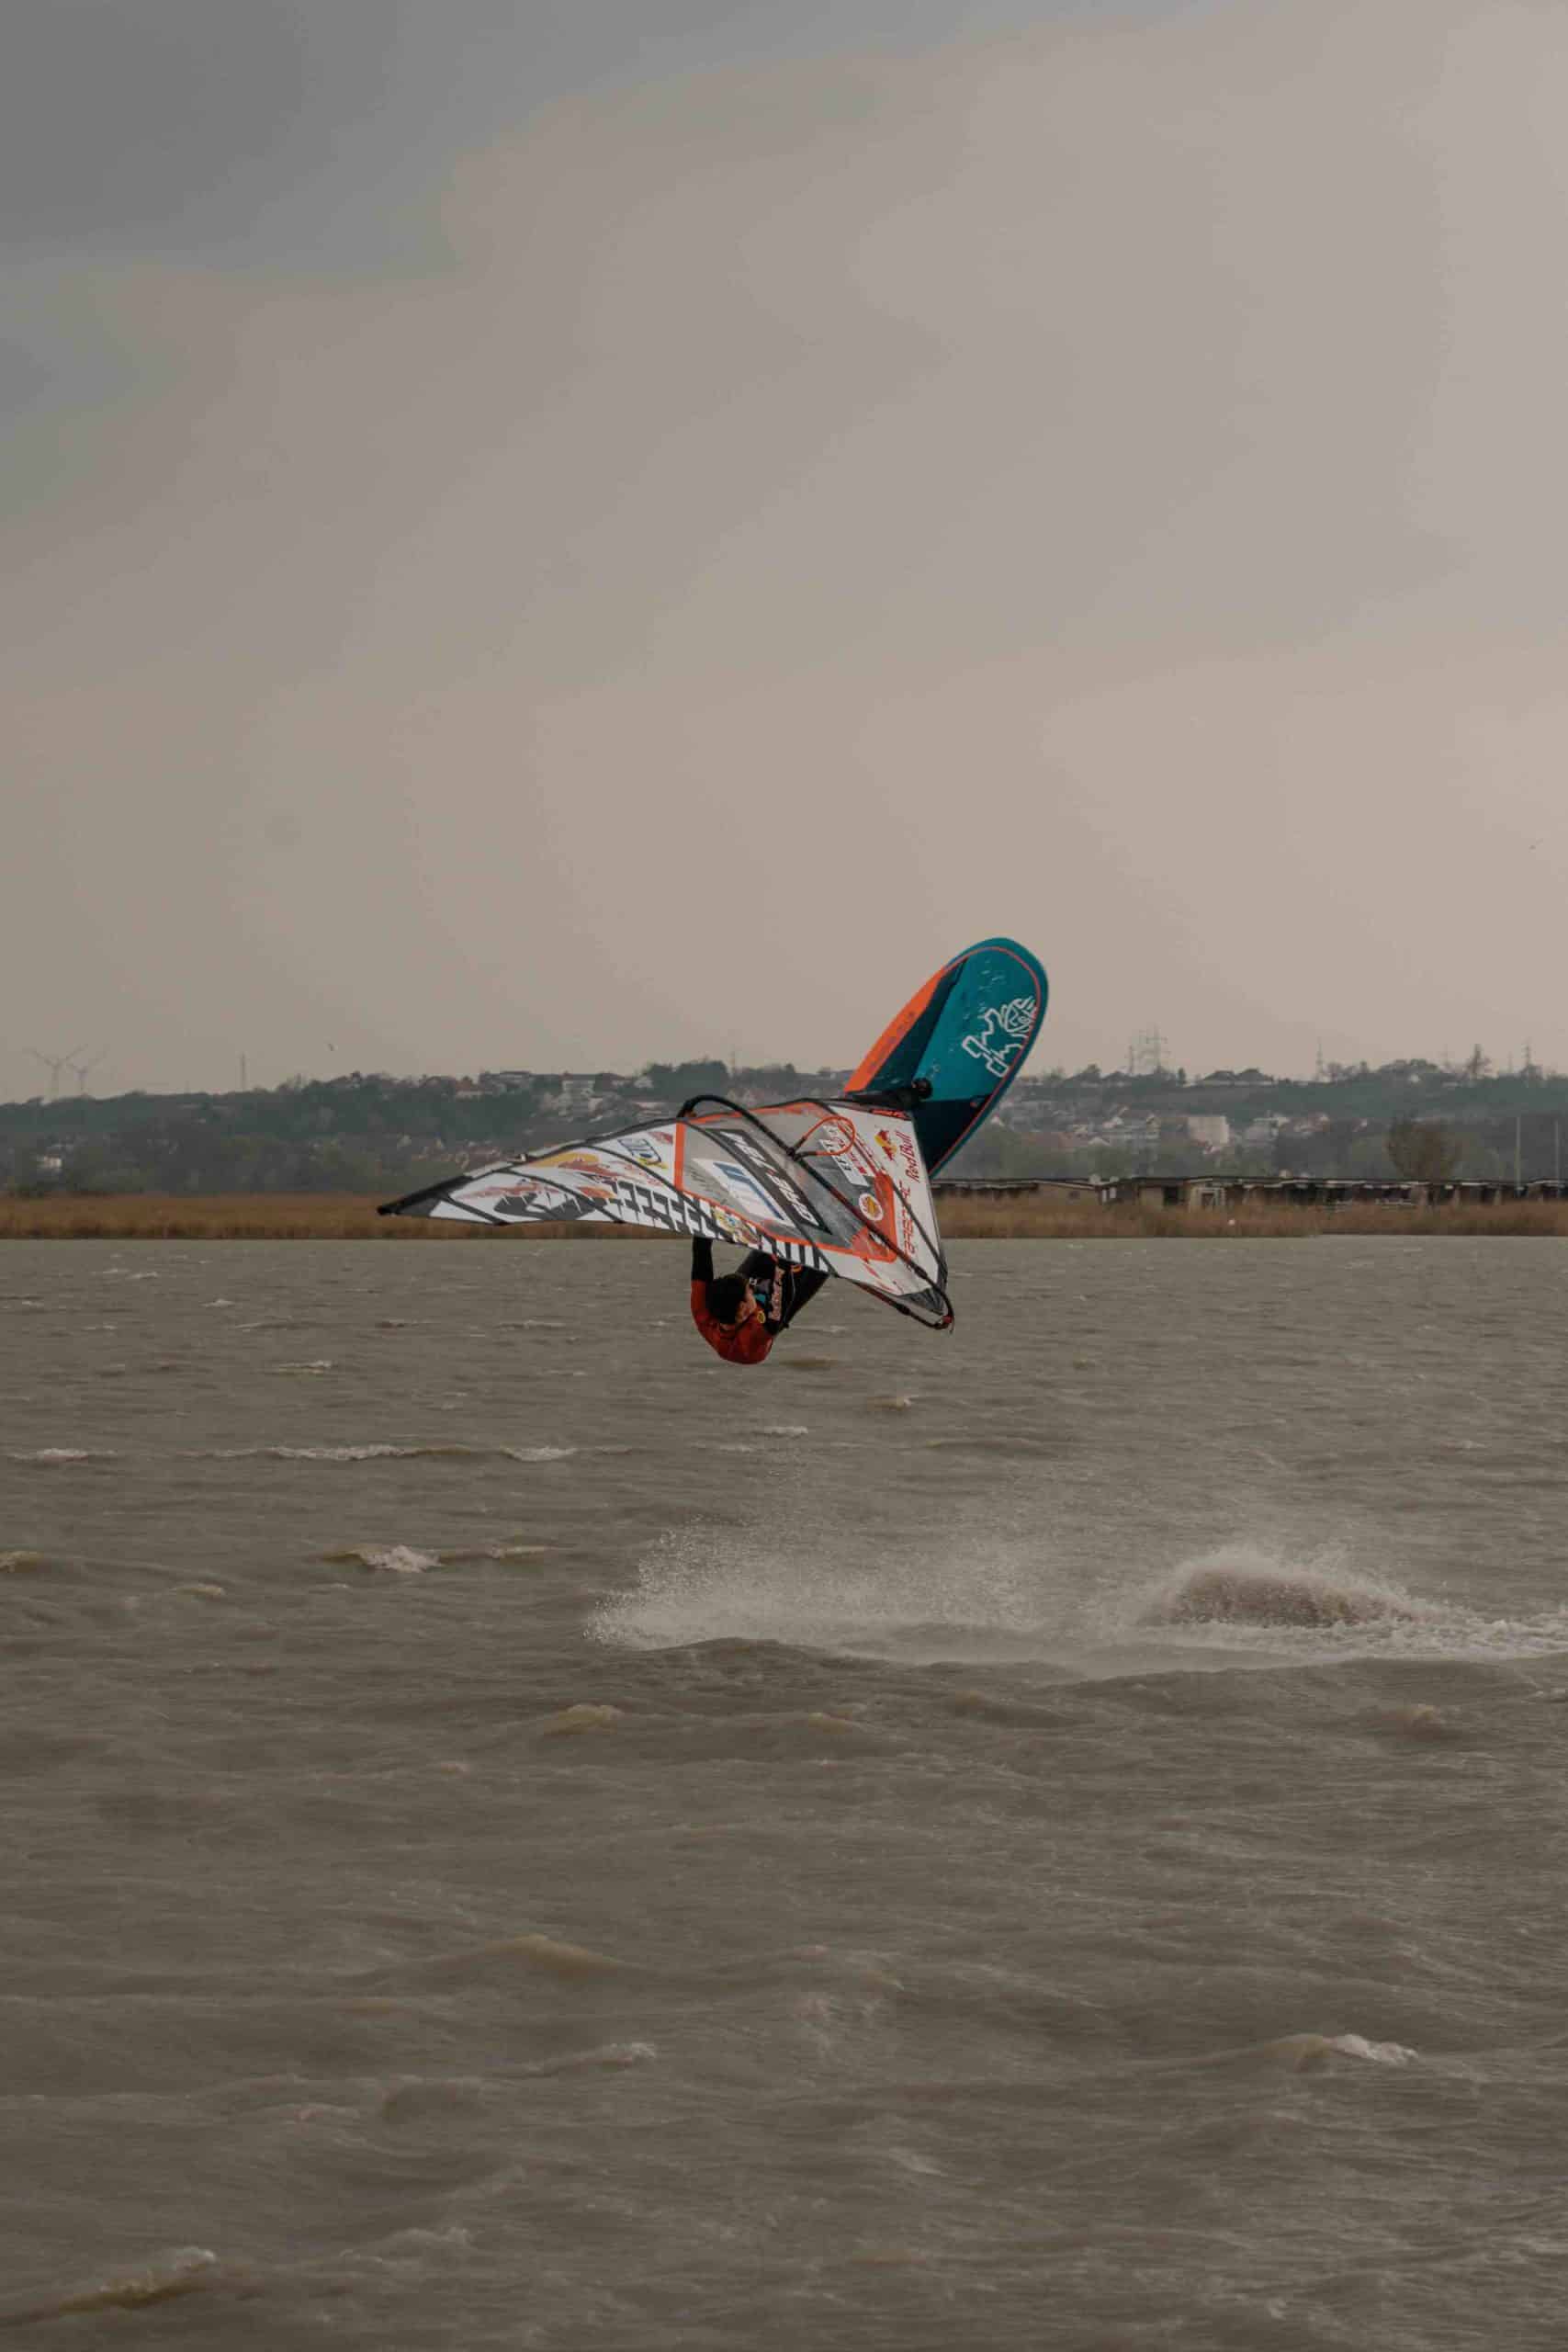 Back In Competition – Lennart On The Podium! - 3 - Windsurf